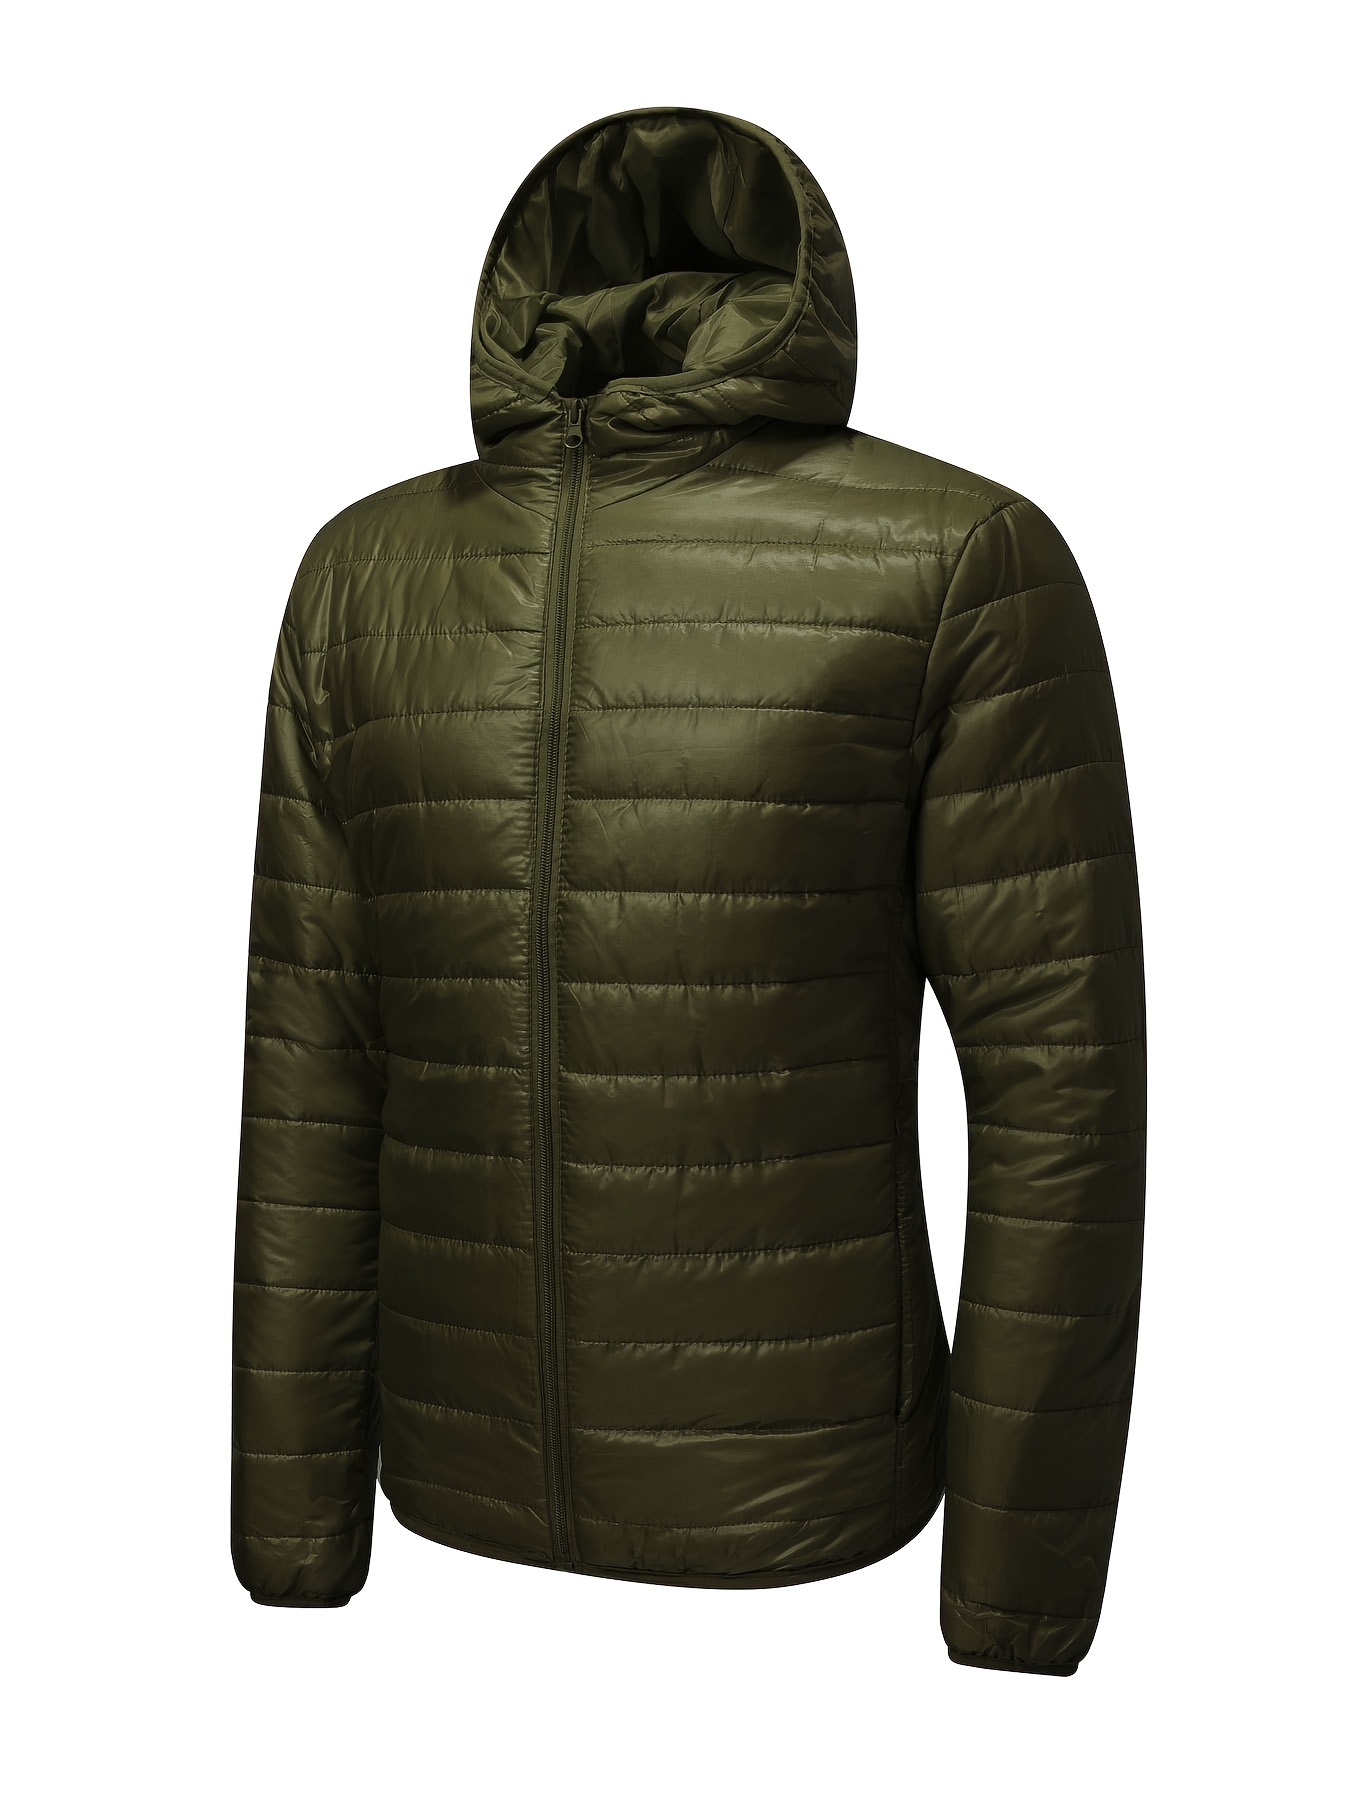 Jwzuy Men's Lightweight Jacket Warm Windproof Quilted Cotton Padded Coat Green XXL, Size: 2XL